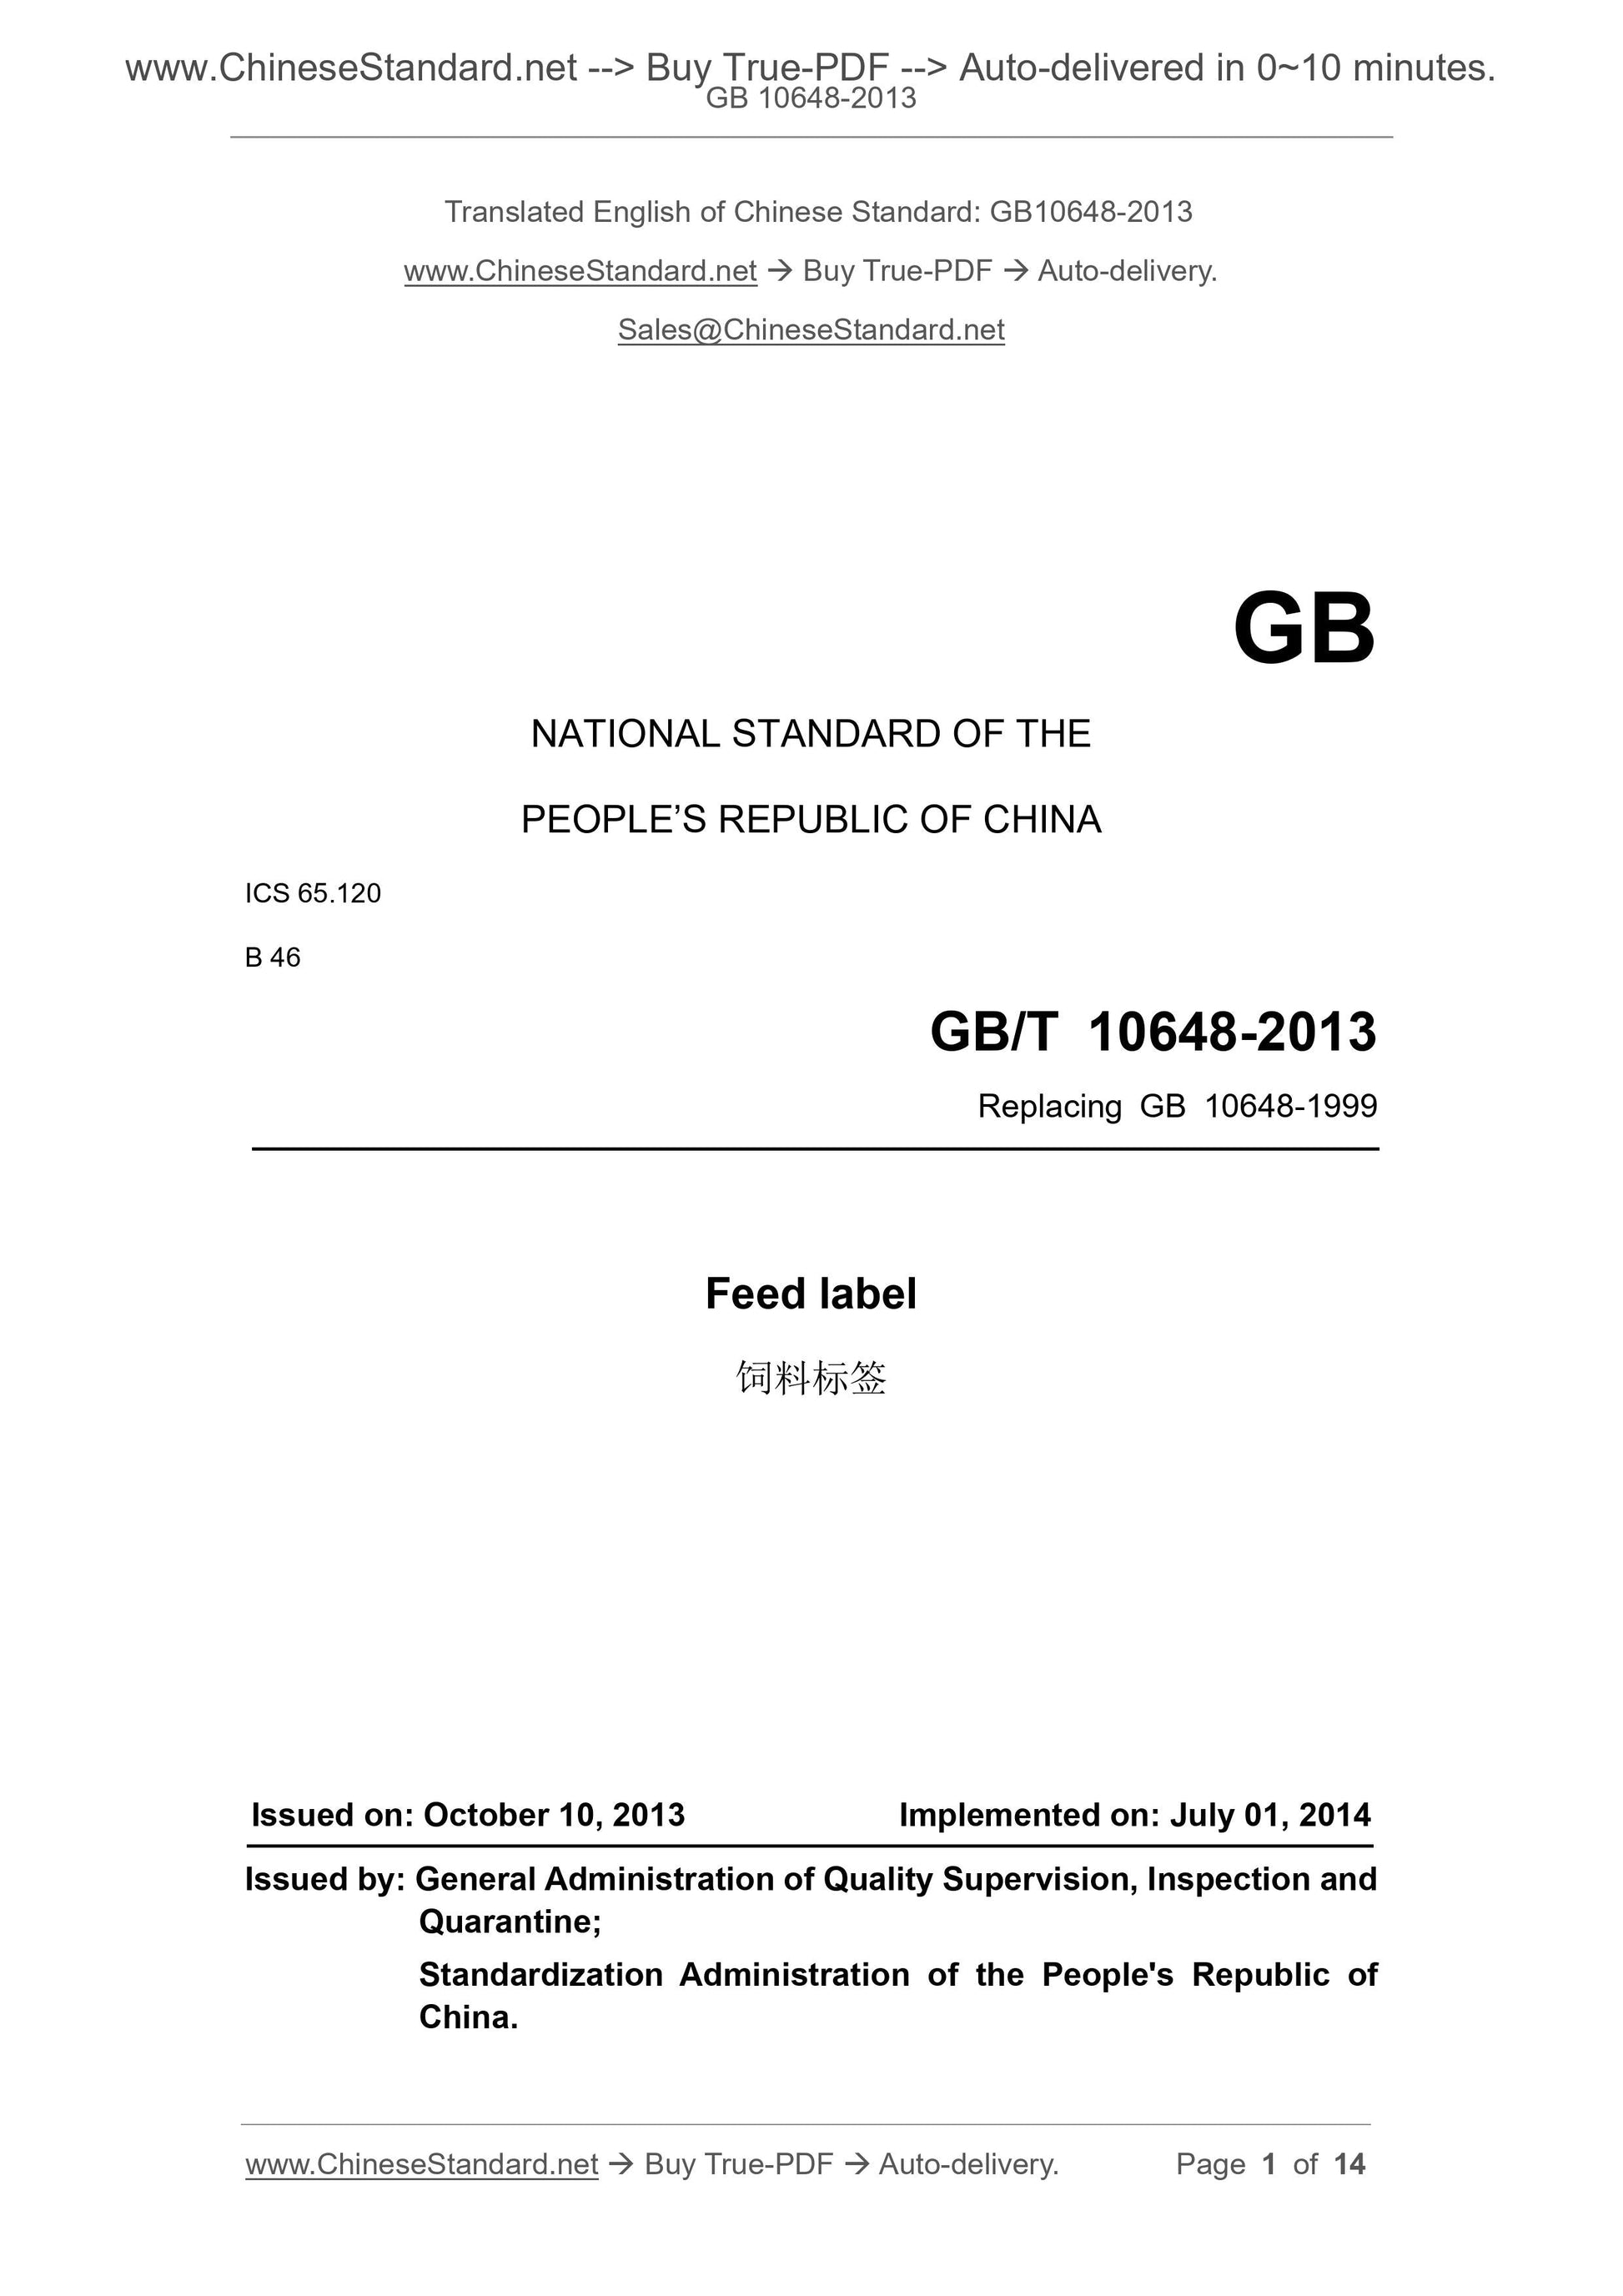 GB 10648-2013 Page 1